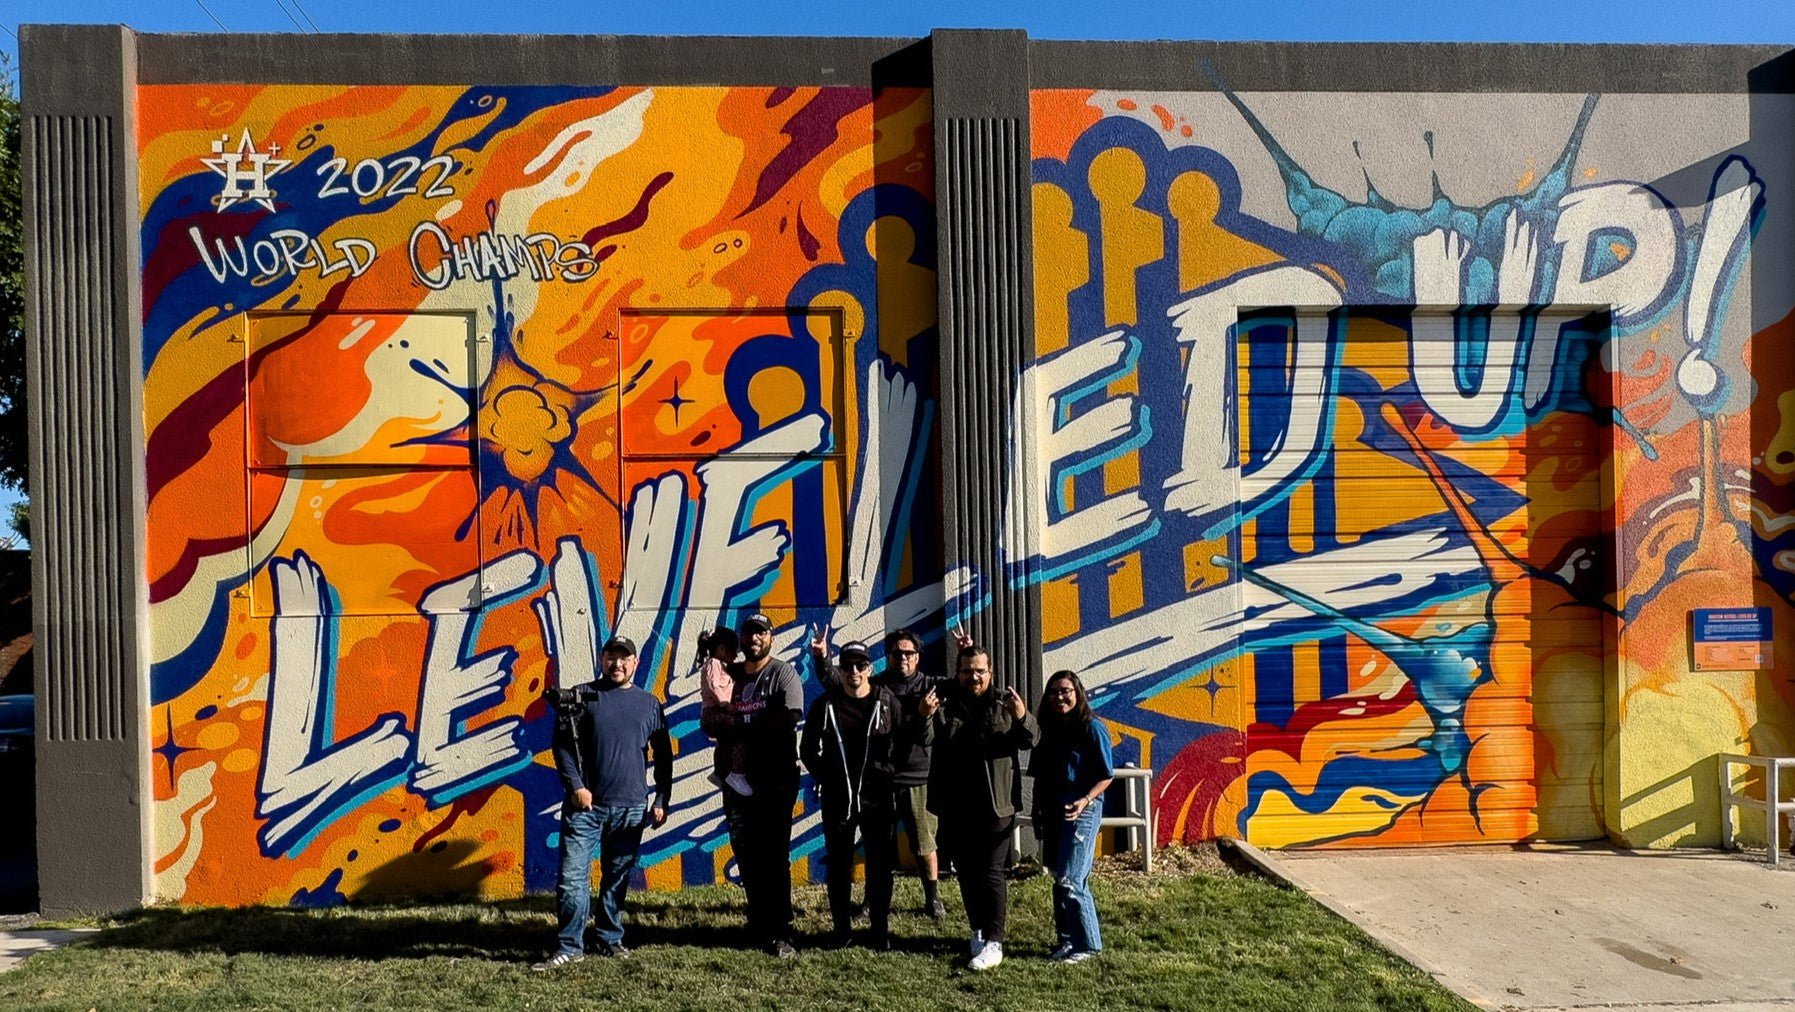 Anthony and his friends and family standing in front of a massive orange mural that reads "LEVELED UP!"